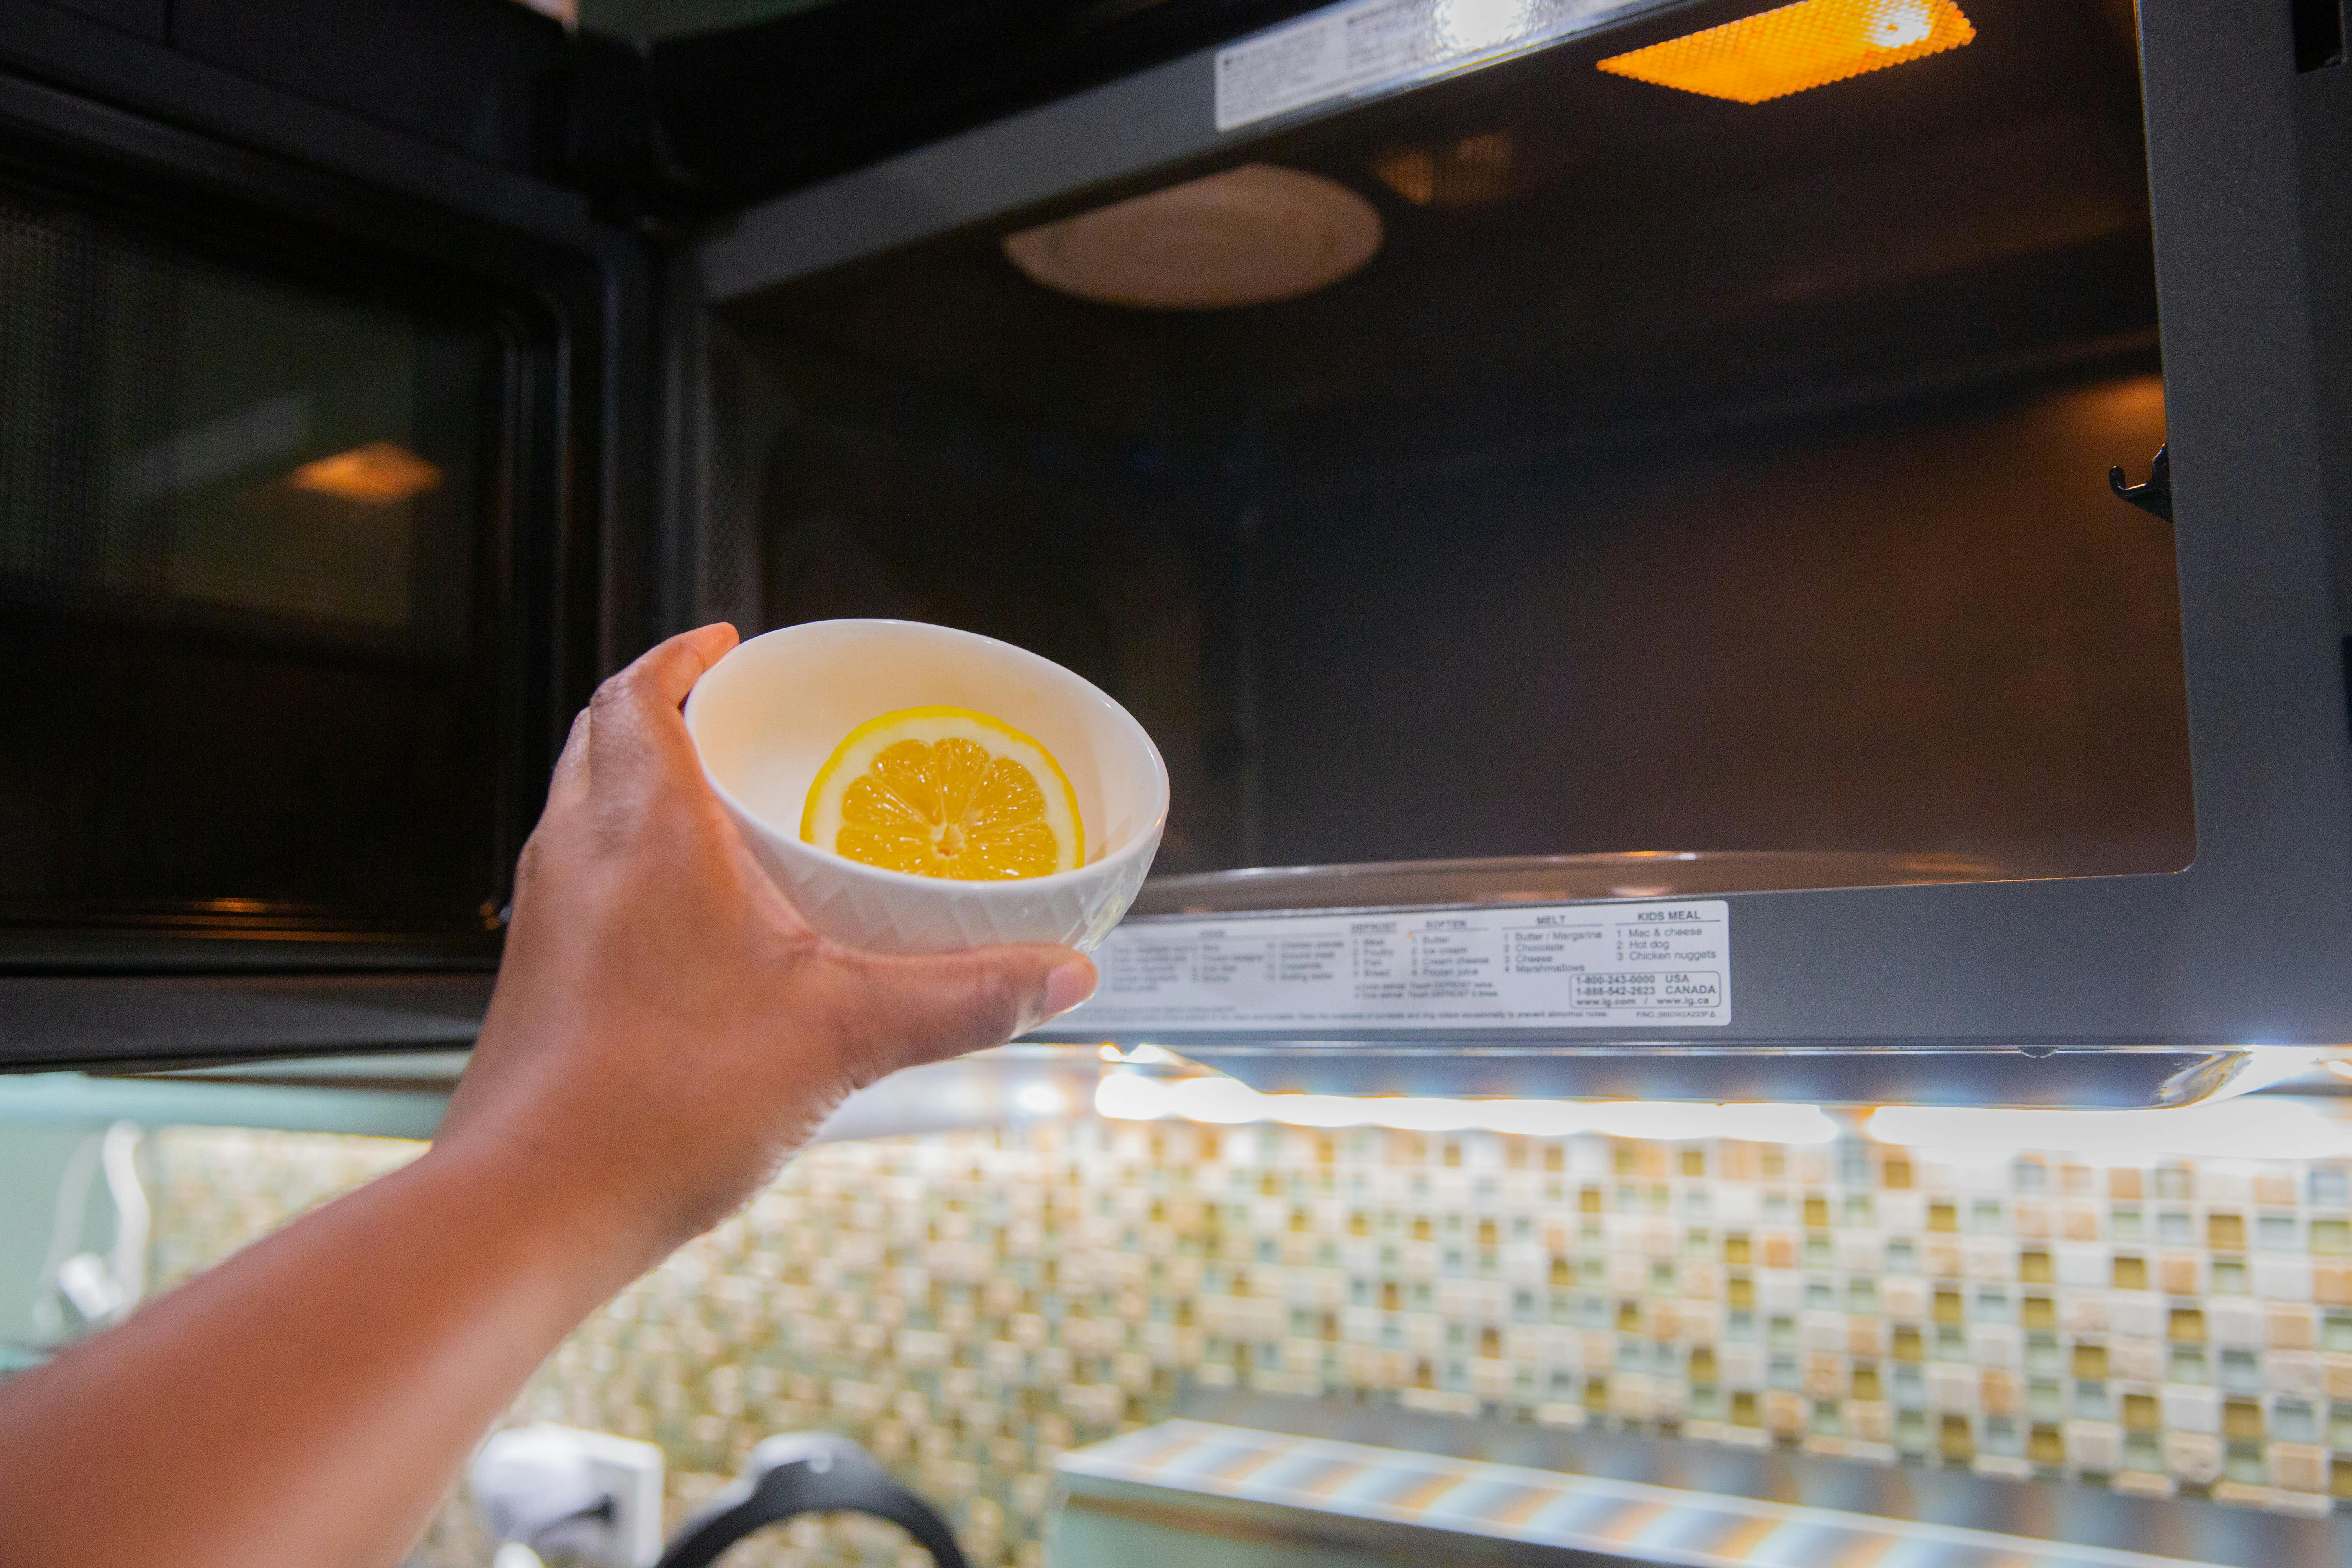 How to Deep Clean a Microwave for Under $1